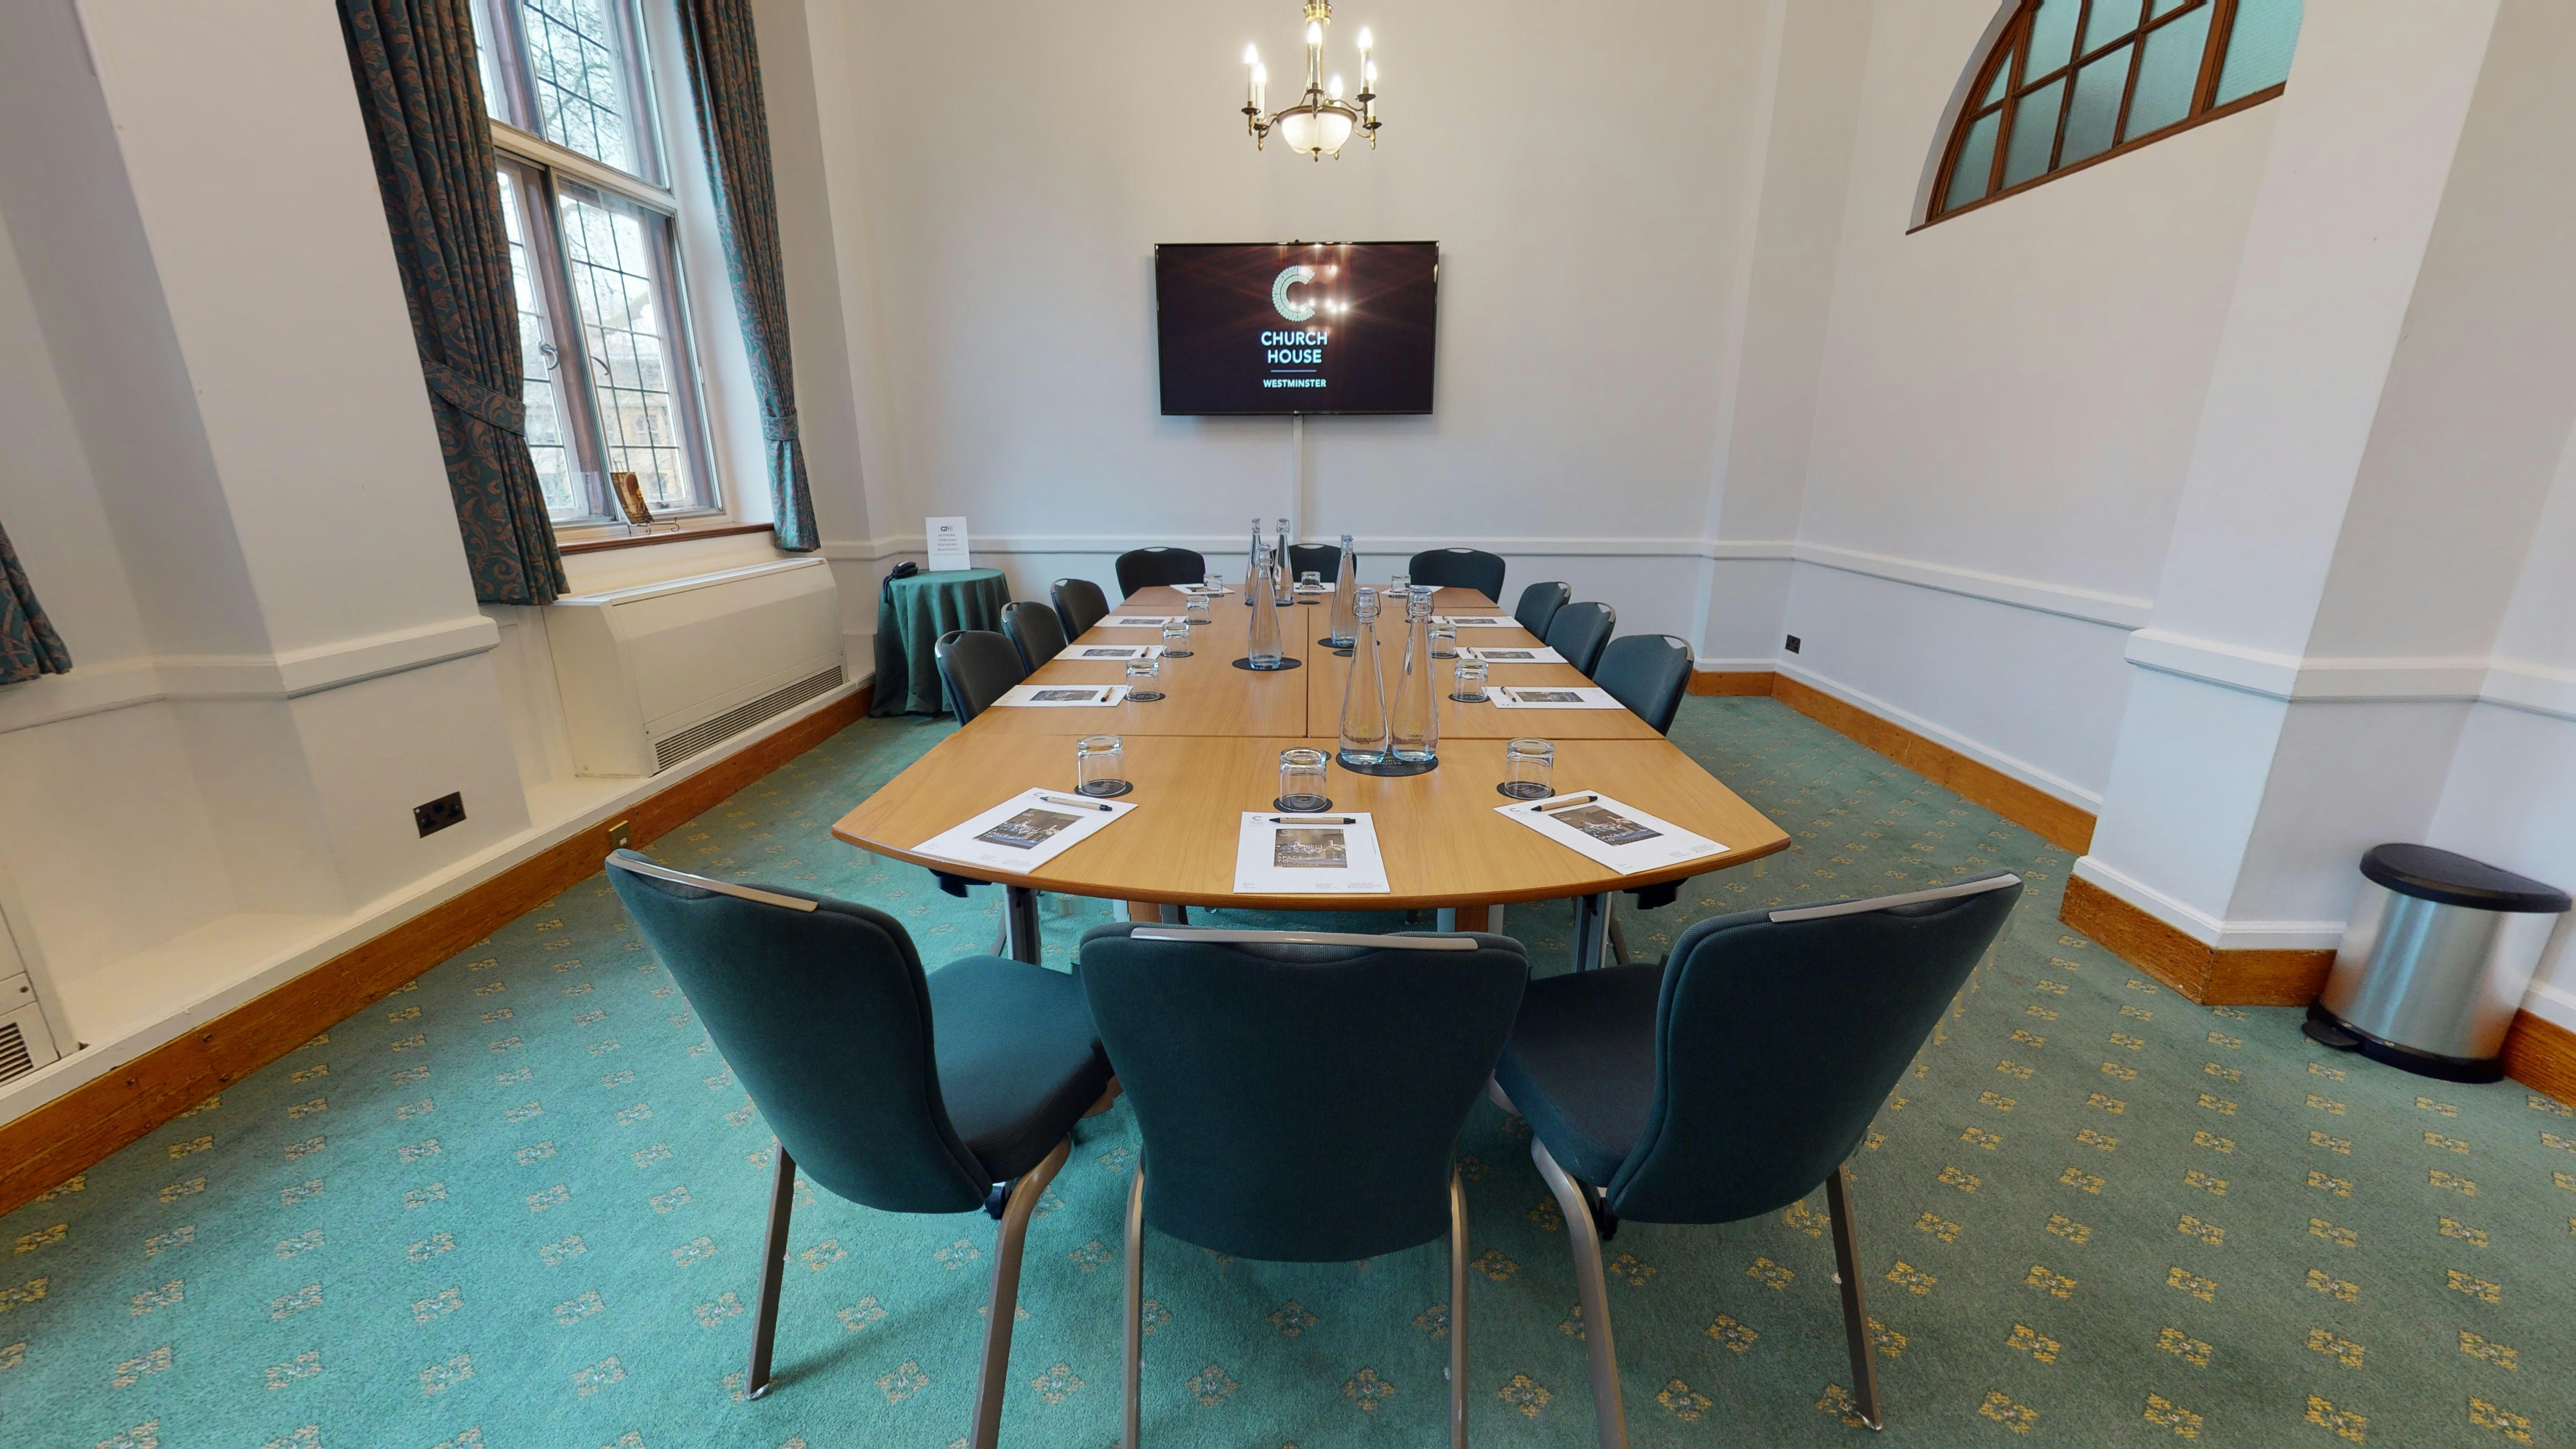 Church House Westminster - Charter Room image 2